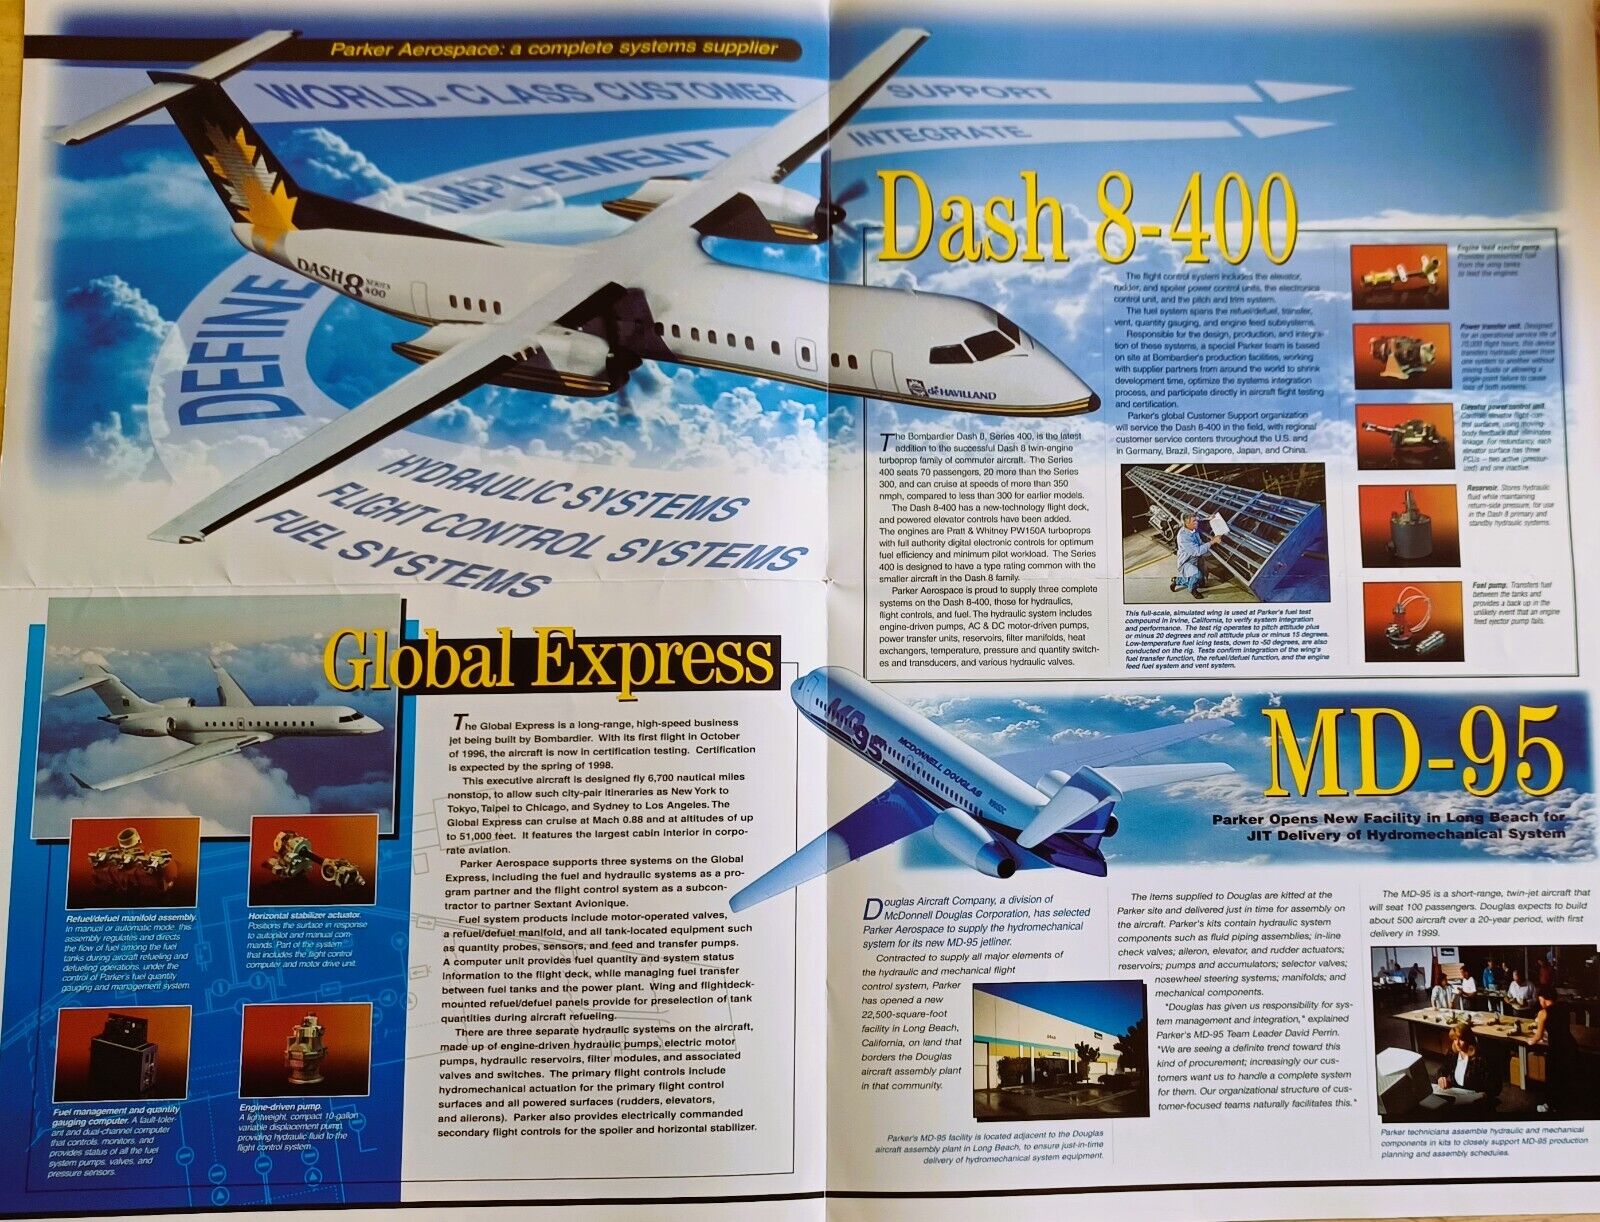 Bombardier Dash 8 400, 777, MD-95, Global Express, Parker Aerospace Newsletter,